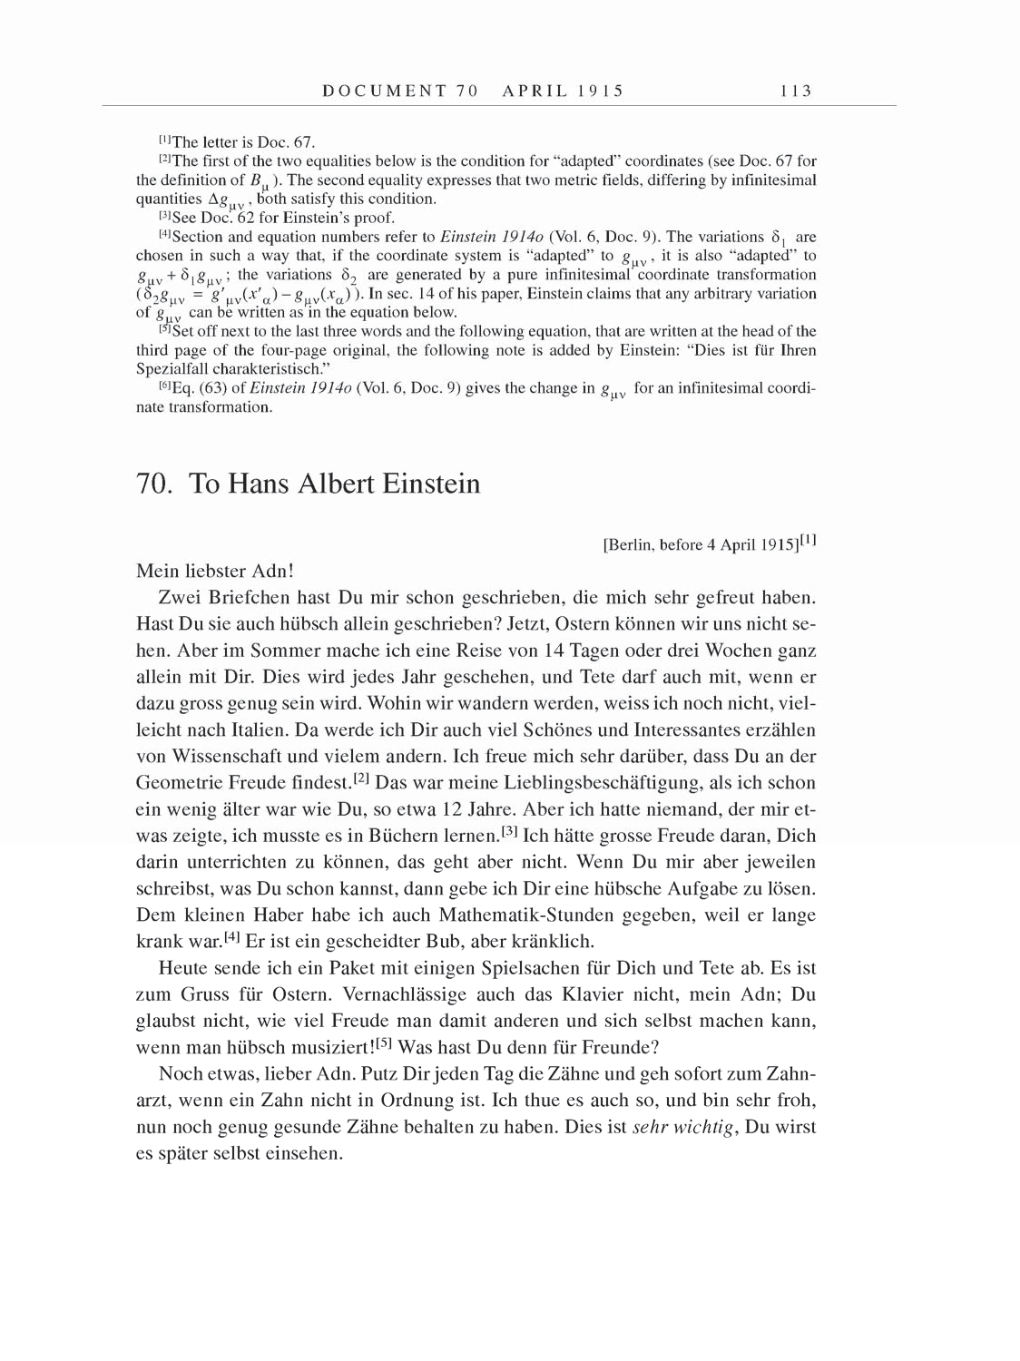 Volume 8, Part A: The Berlin Years: Correspondence 1914-1917 page 113